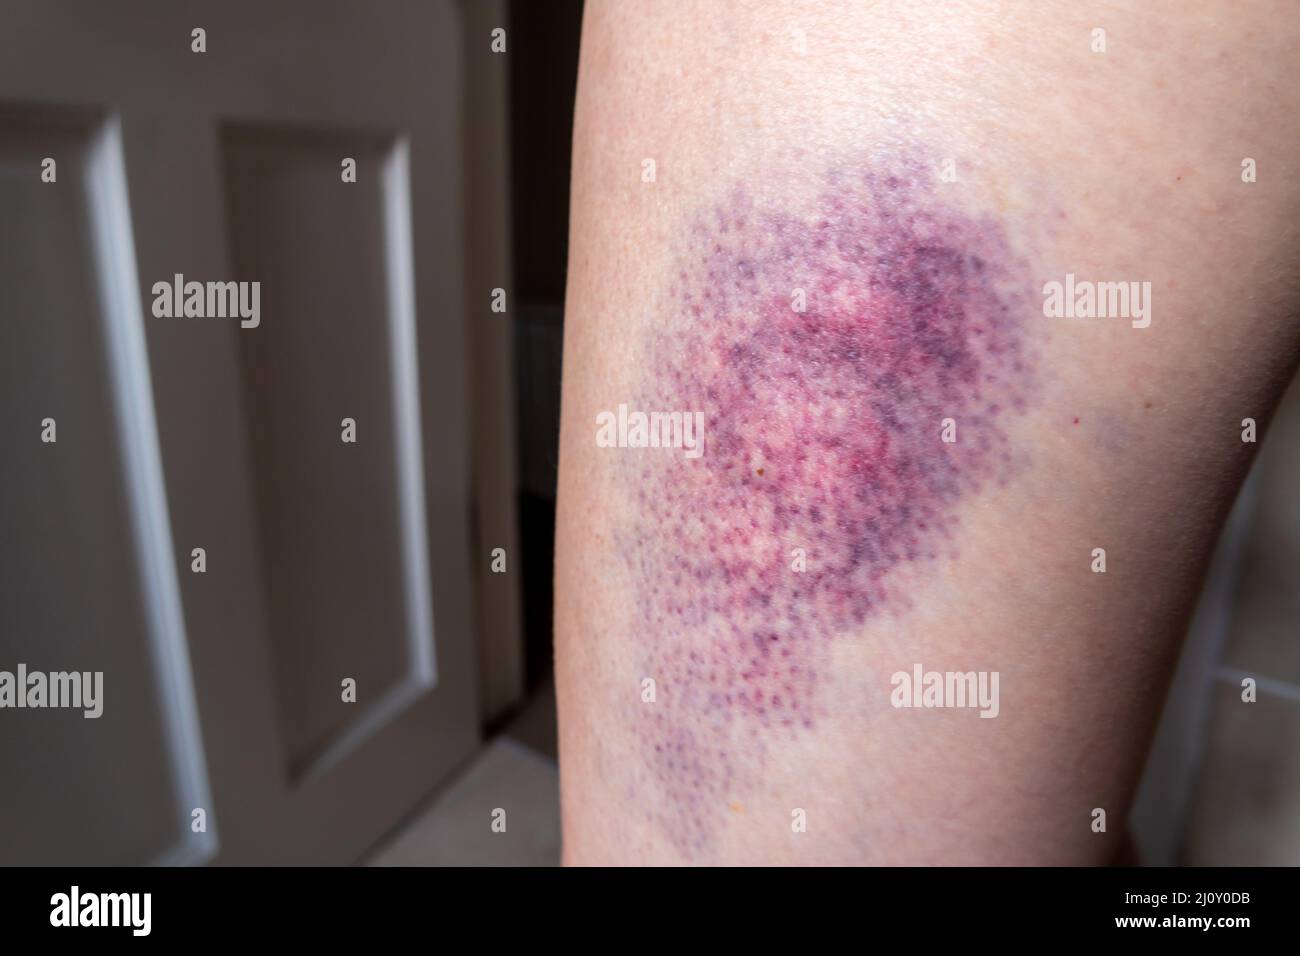 Terrible Bruise On The Upper Leg Of A Woman Stock Photo Alamy